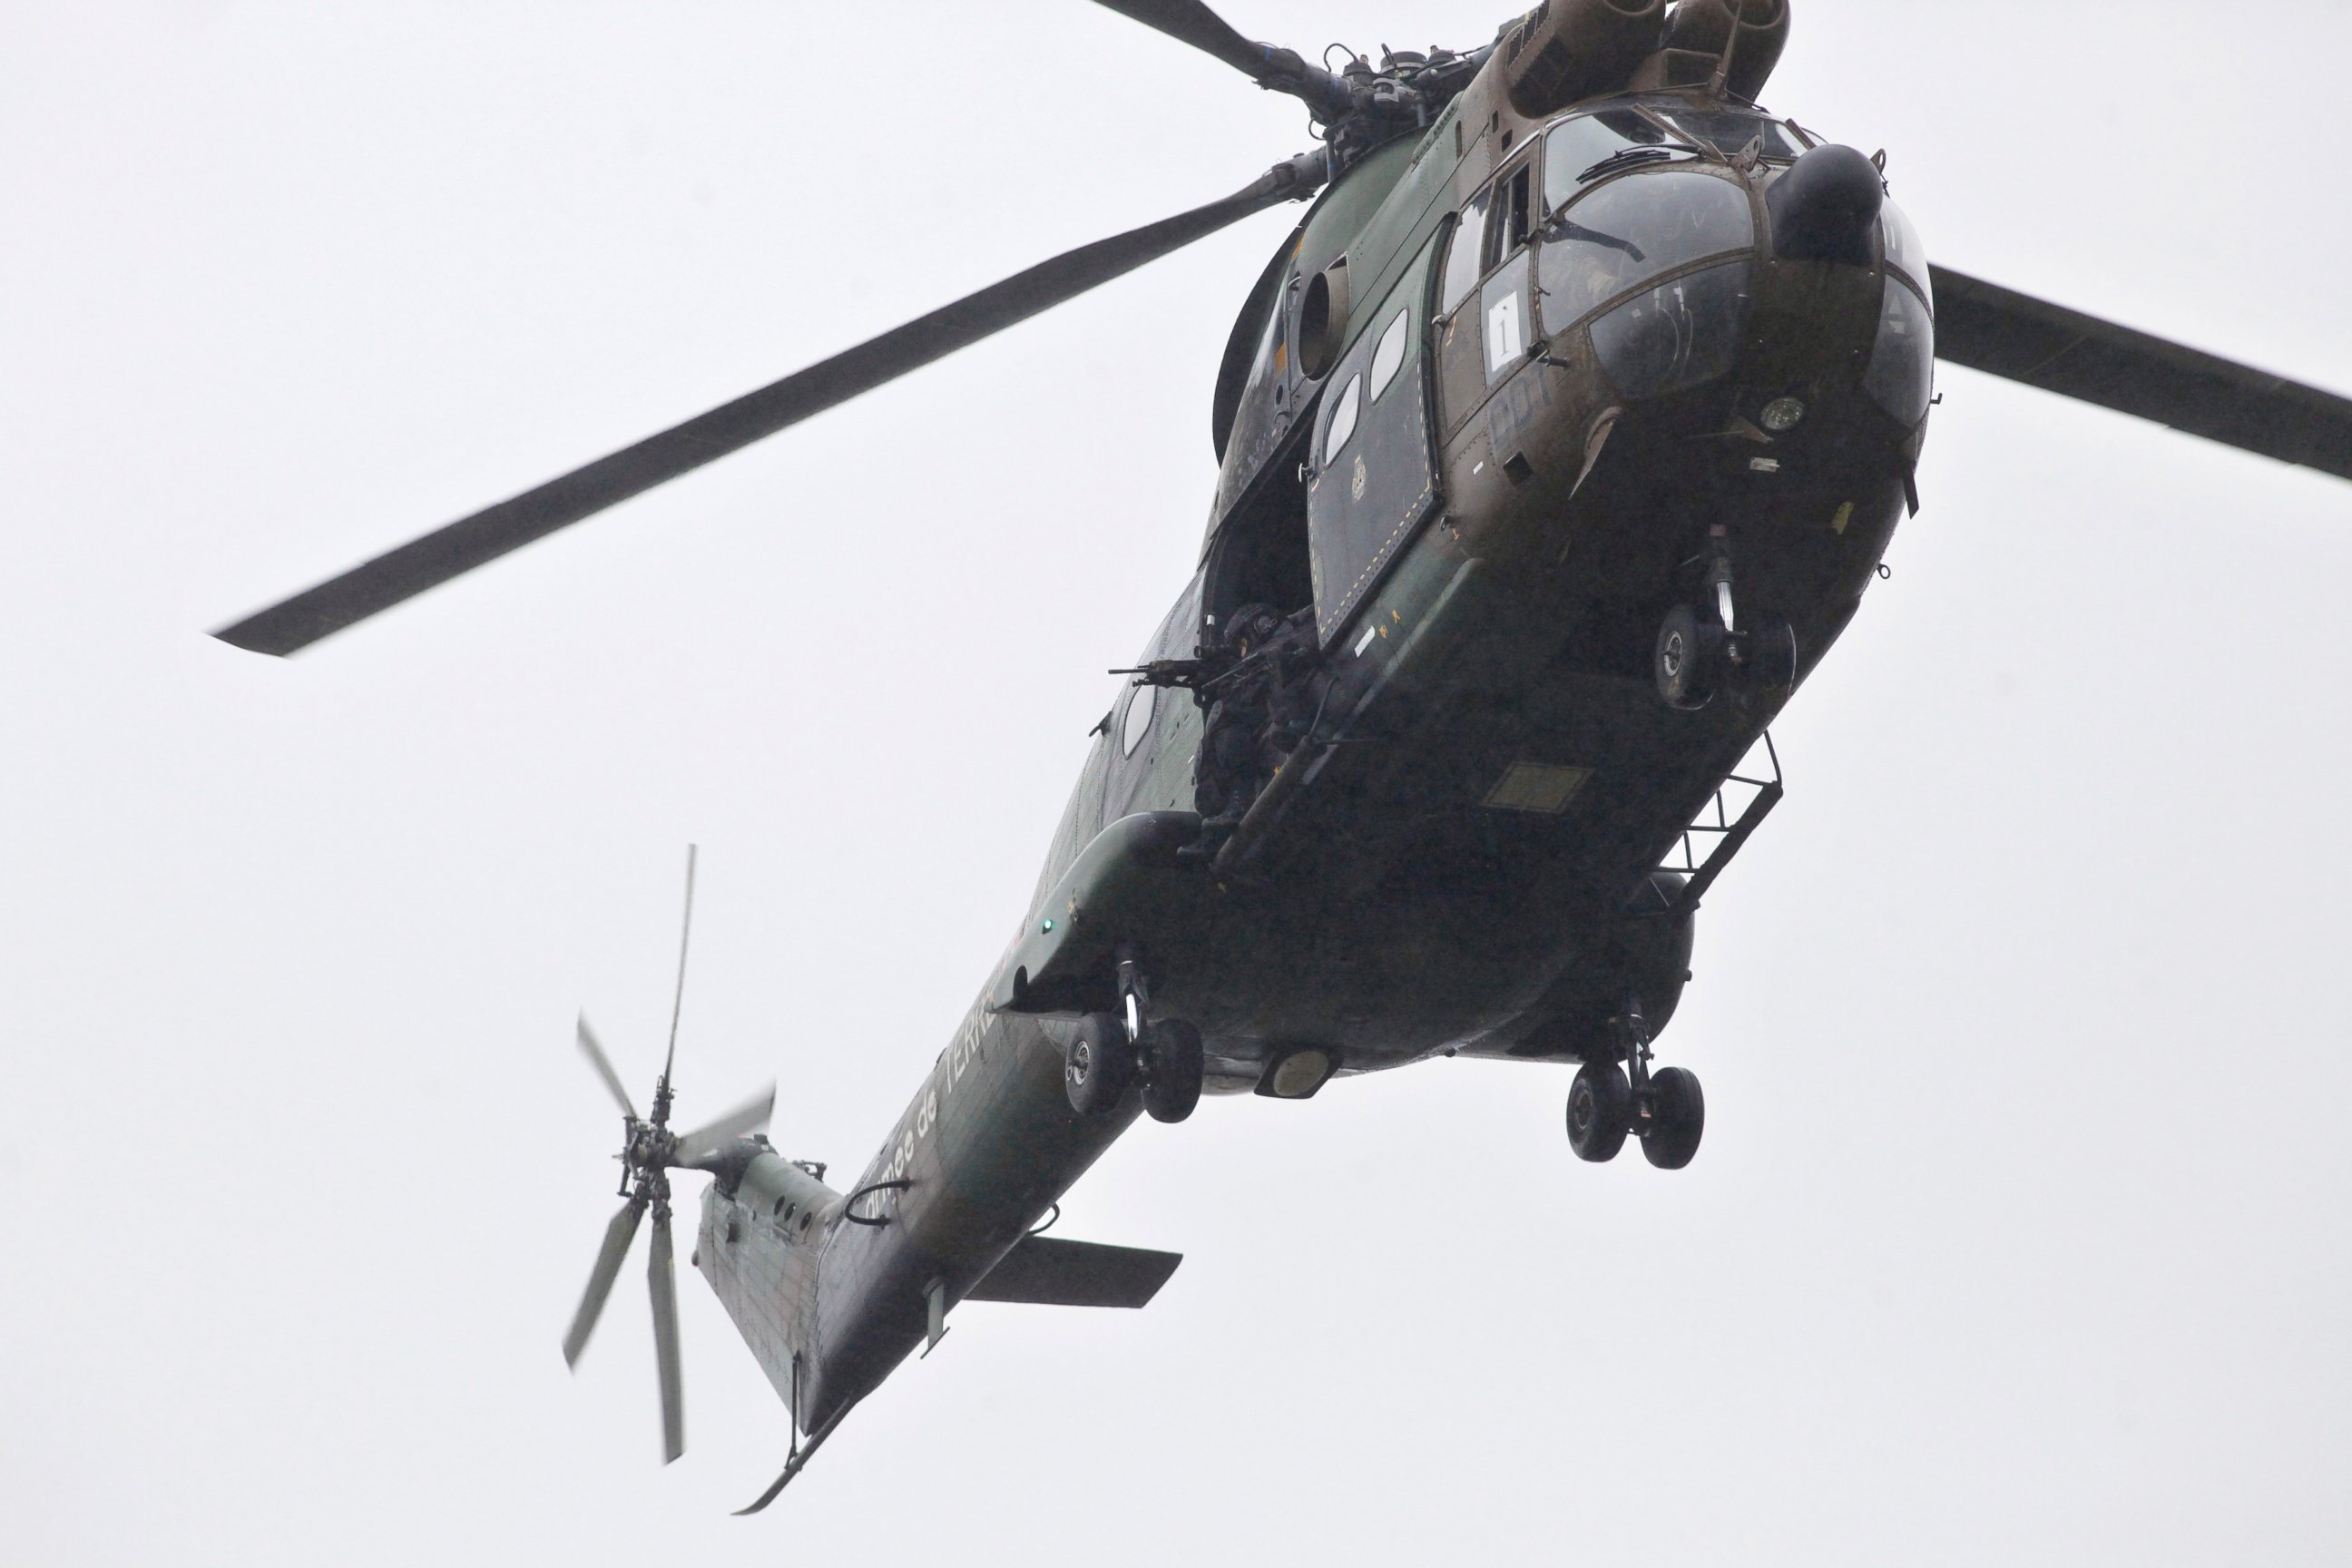 PHOTO: Armed French security forces fly over the location where two heavily armed suspects, believed to have taken part in the Charlie Hebdo shootings, are located in Dammartin-en-Goele, northeast of Paris, Jan. 9, 2015. 